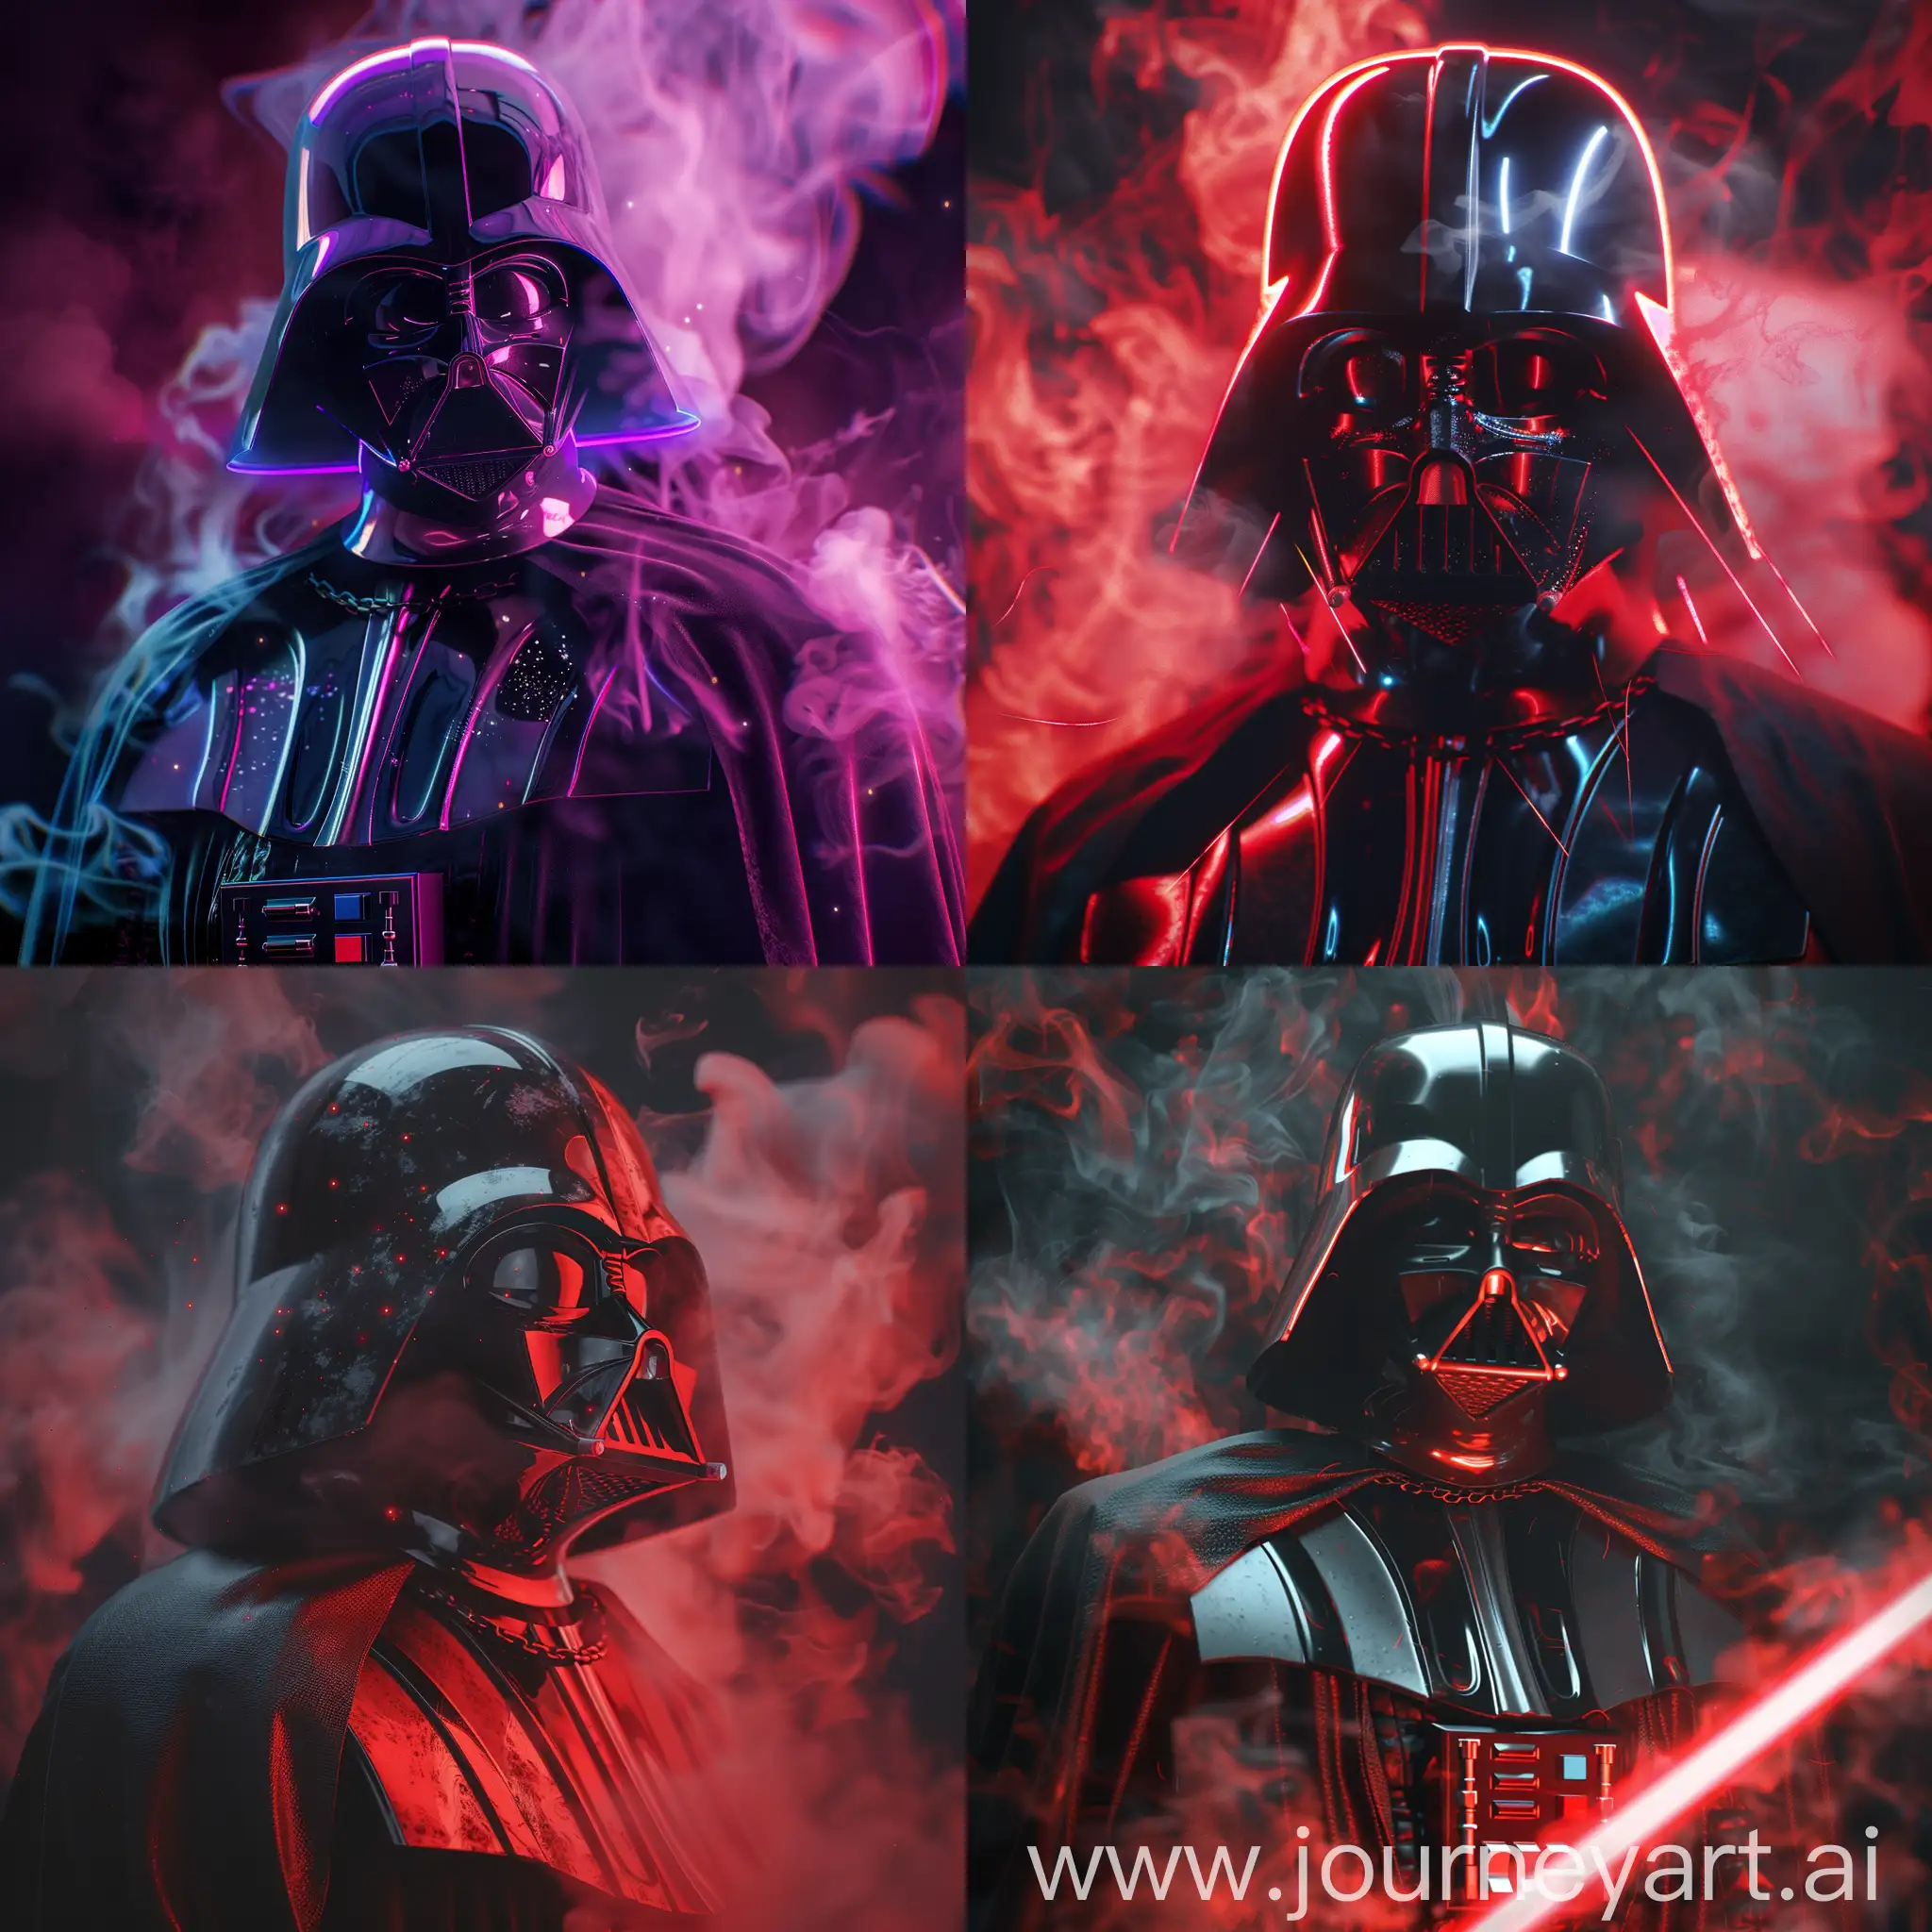 Cybergunk-Darth-Vader-with-Realistic-Smoke-Effects-and-Stunning-Lighting